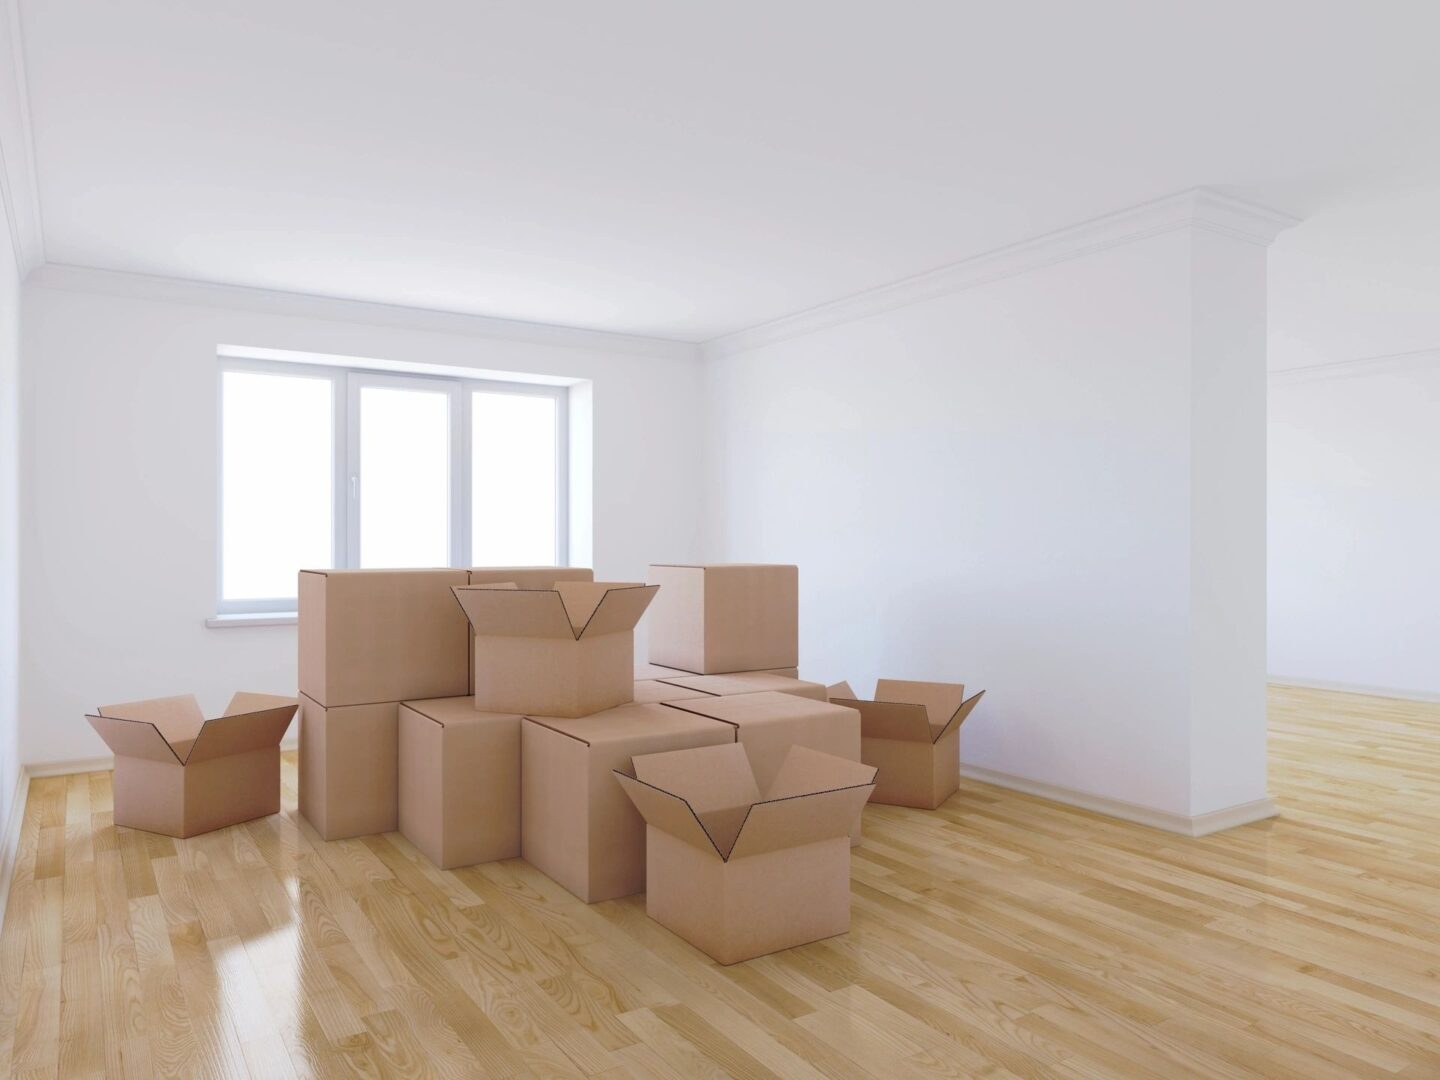 3d render of moving boxes in empty room